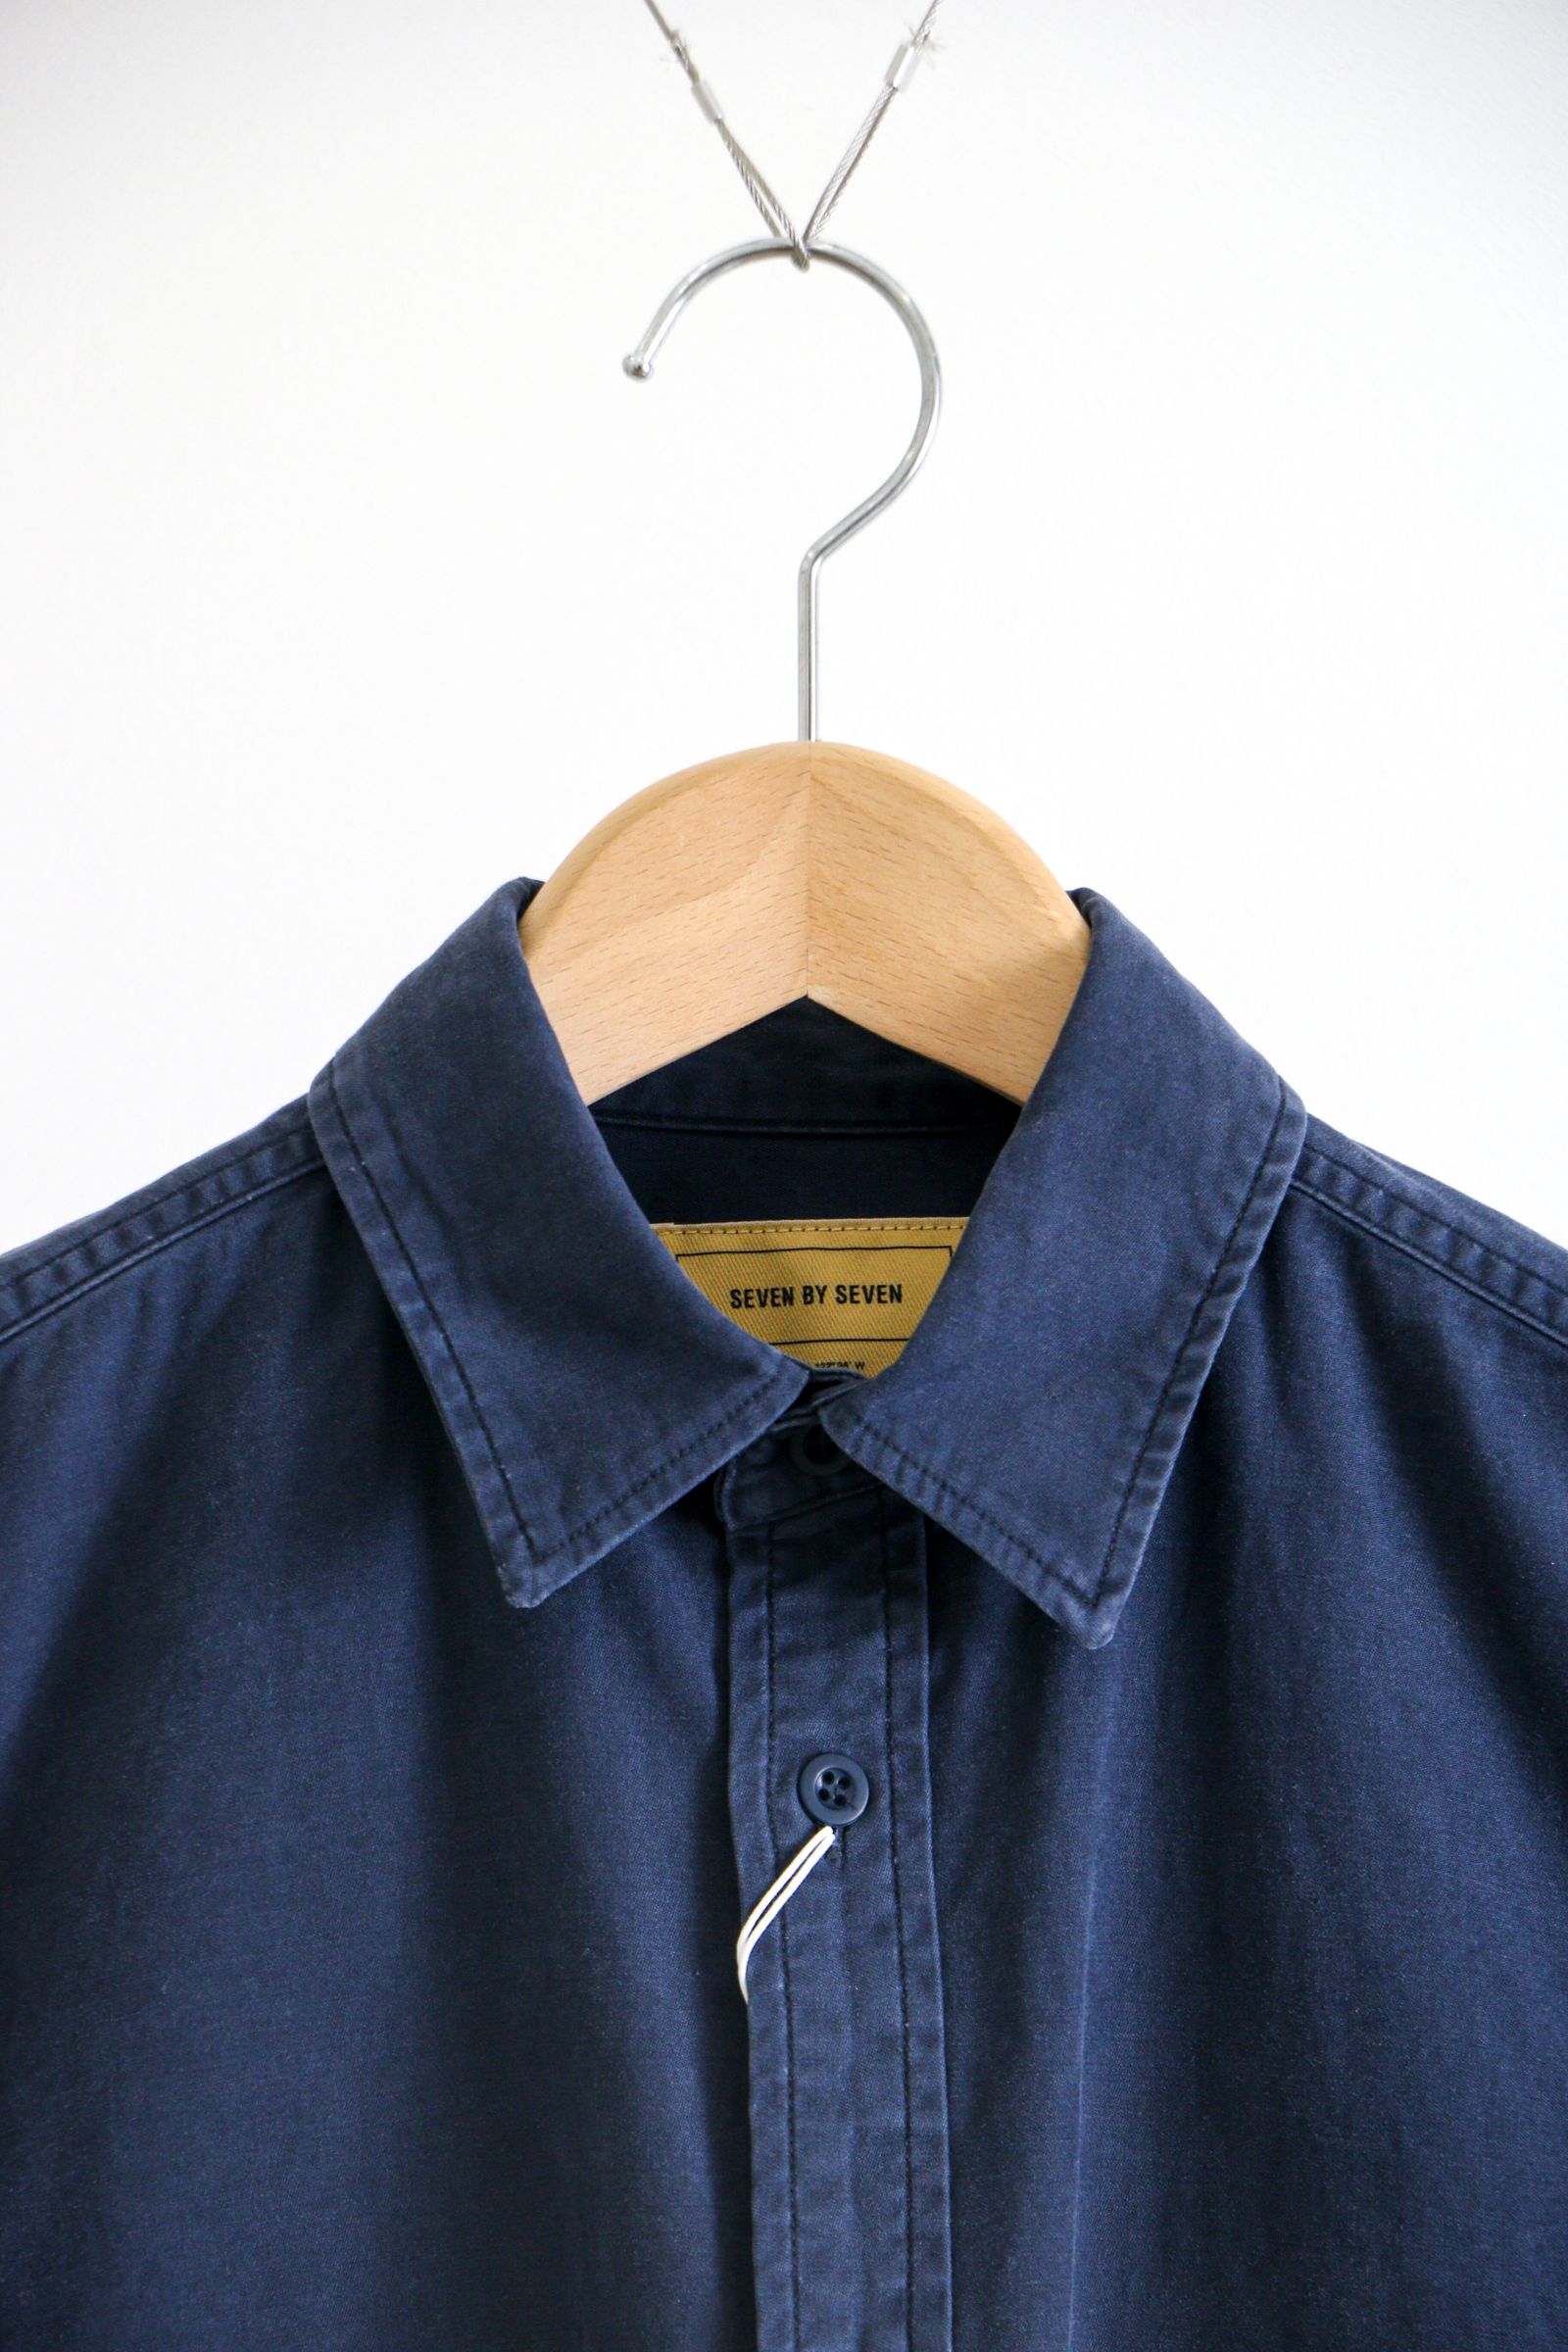 SEVEN BY SEVEN - WORK SHIRTS - Cotton Rayon sation - NVY / ワーク ...